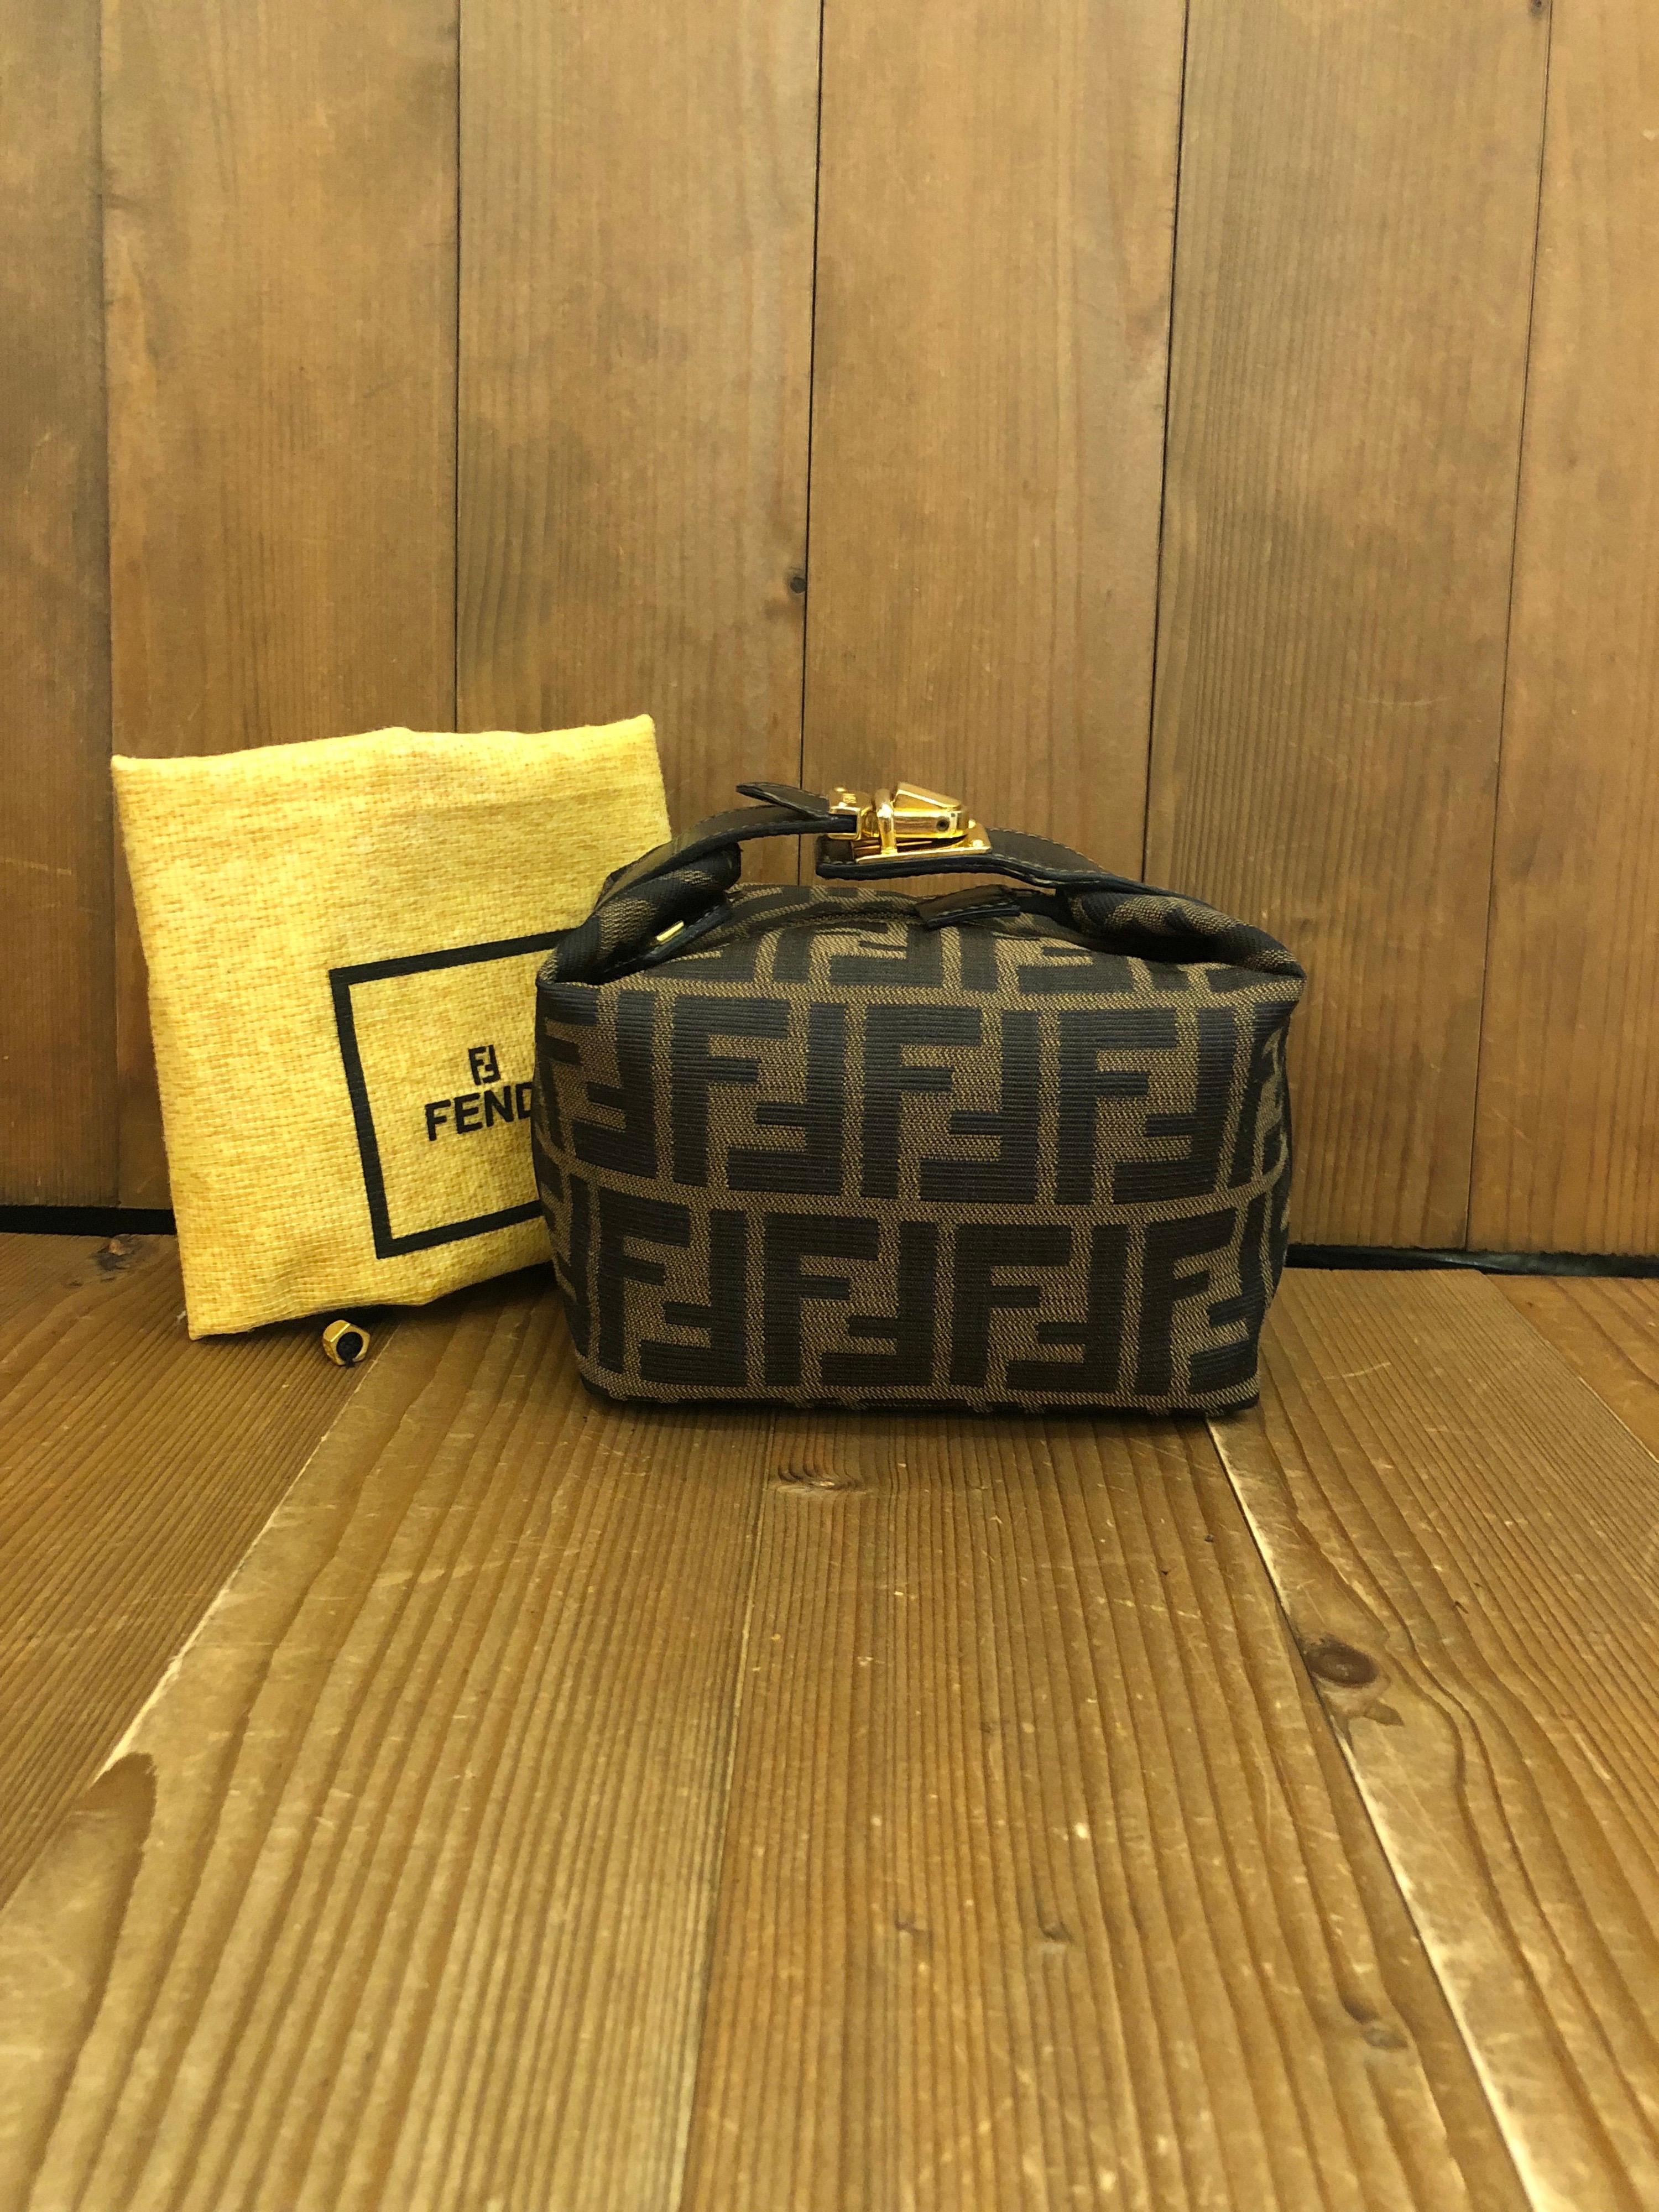 Vintage Fendi mini vanity pouch in Fendi's iconic Zucca jacquard featuring gold toned buckled handle. Made in Italy. Measures 6 x 5 x 3.75 inches (fits plus-sized iPhone)

Condition: Minor signs of wear. Generally in good condition.

Outside: Minor